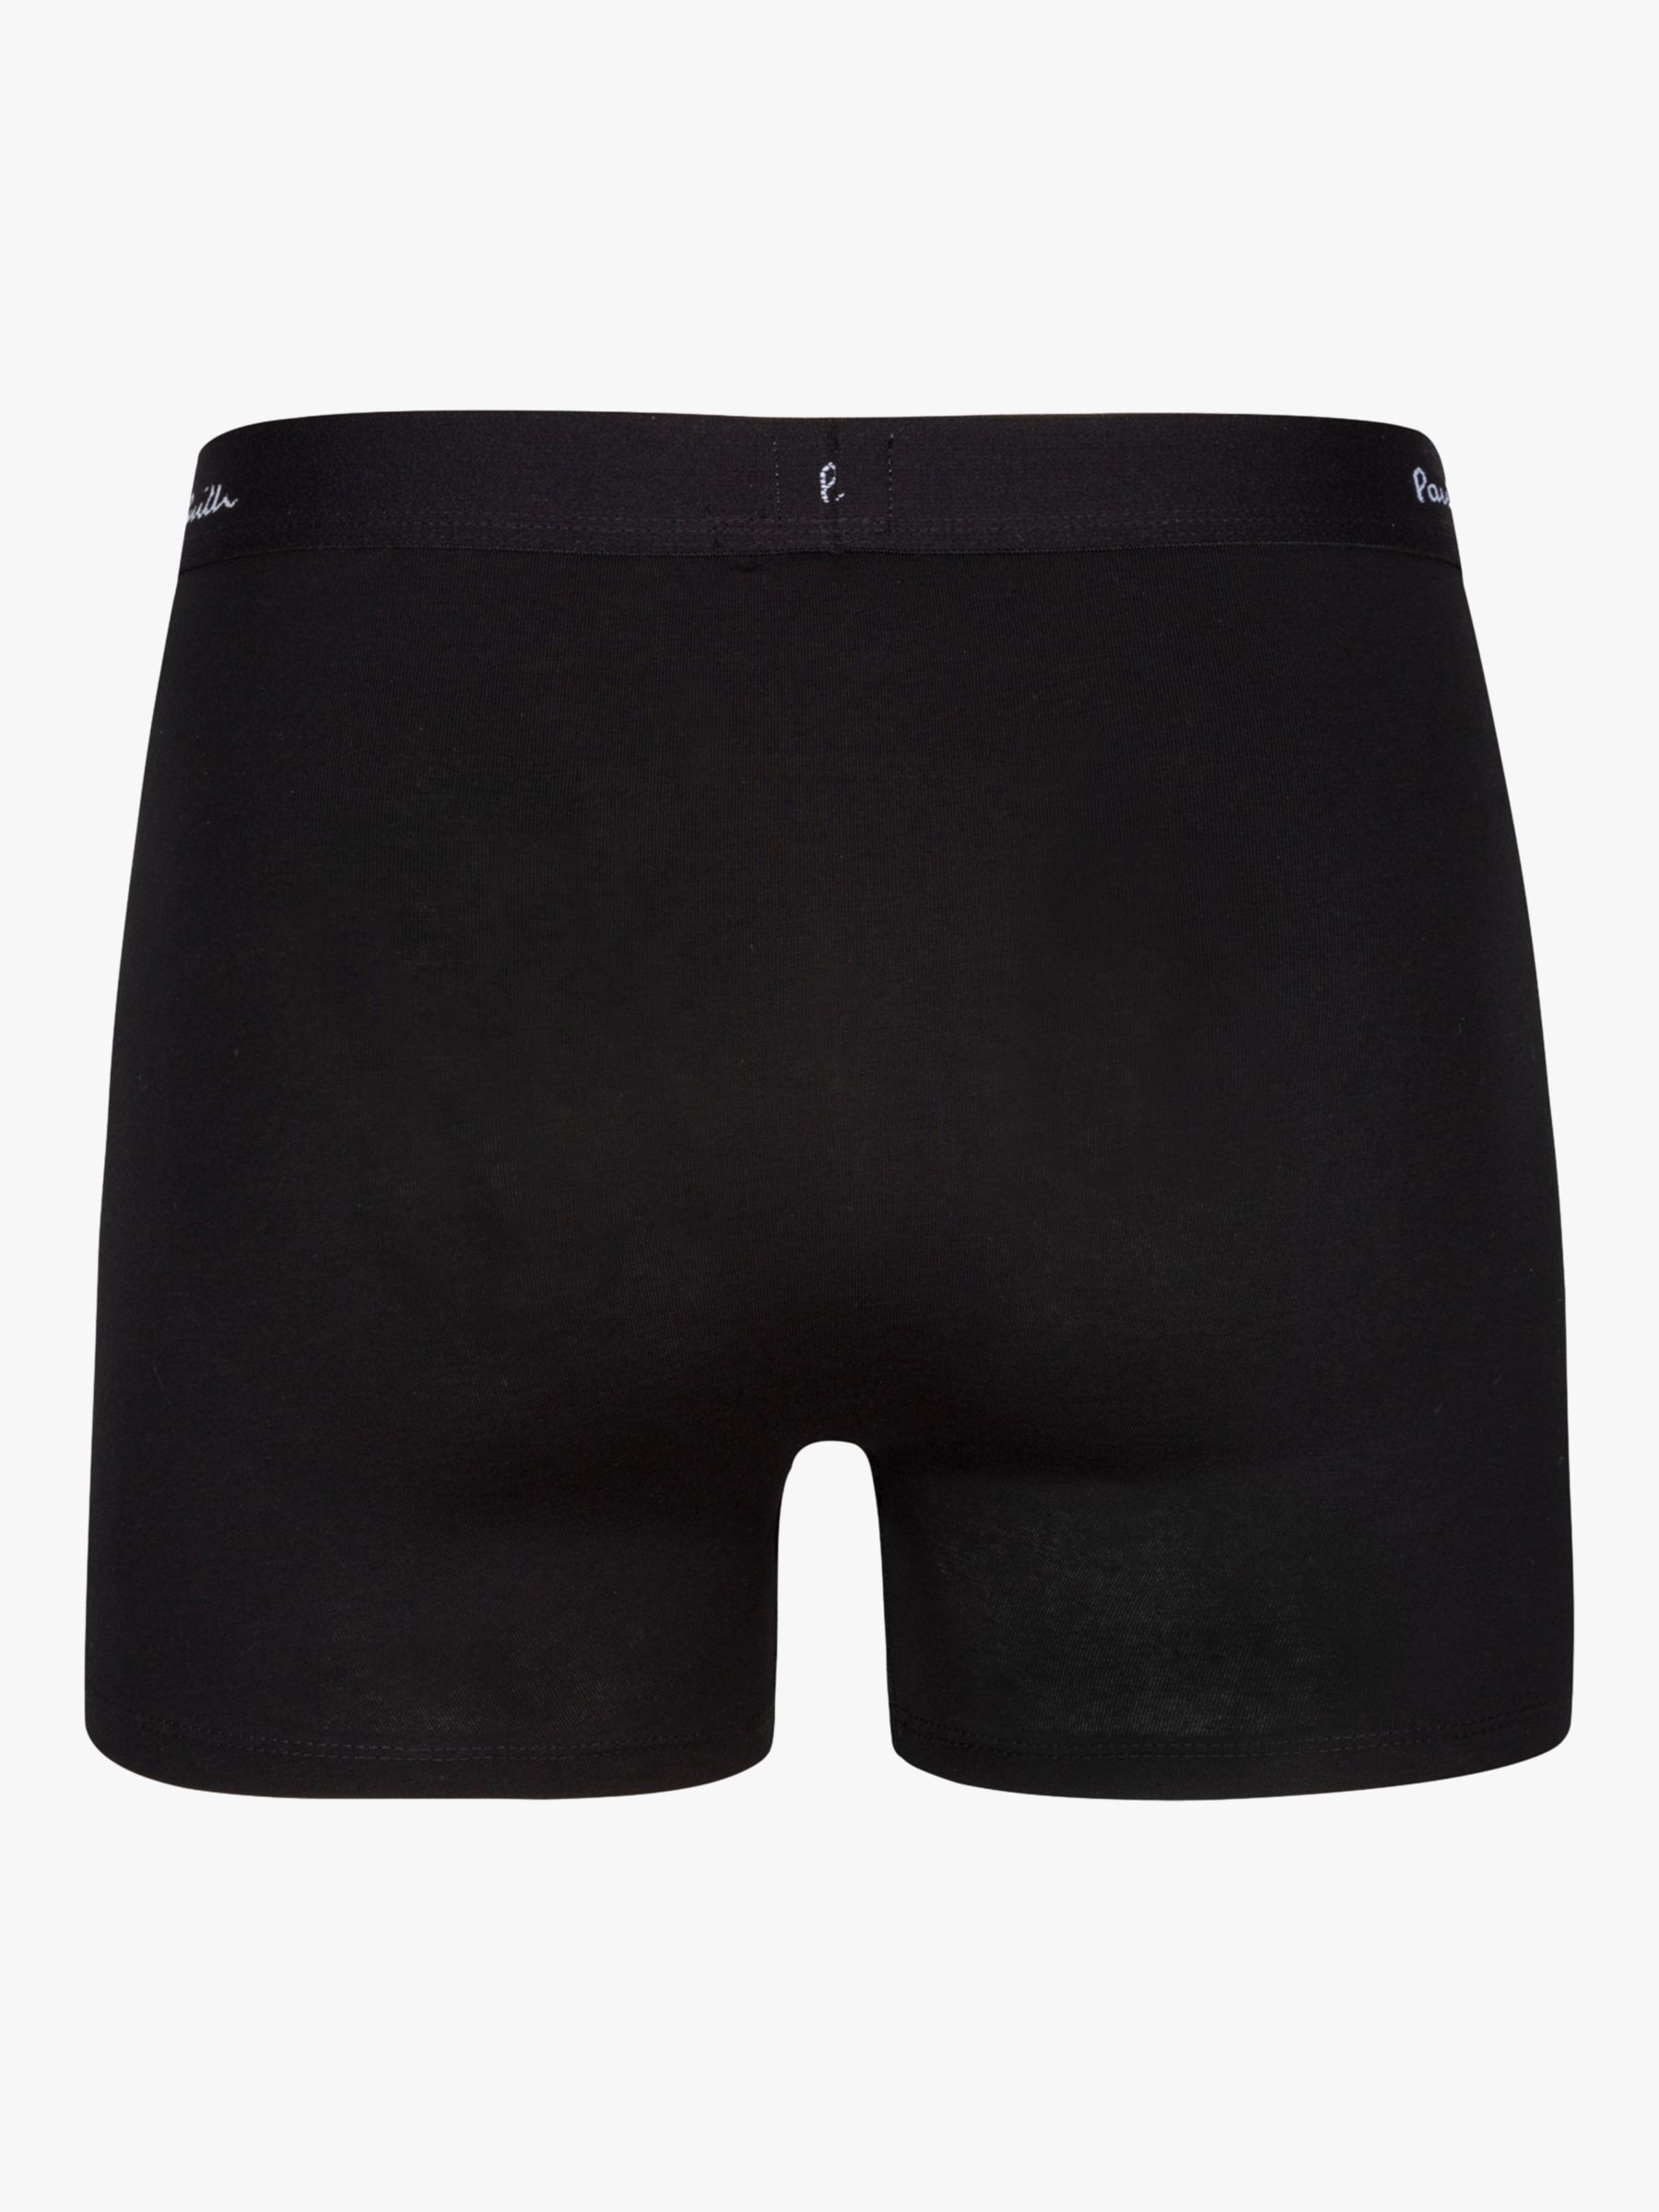 Paul Smith Stretch Cotton Long Trunks, Pack of 3, Black at John Lewis &  Partners